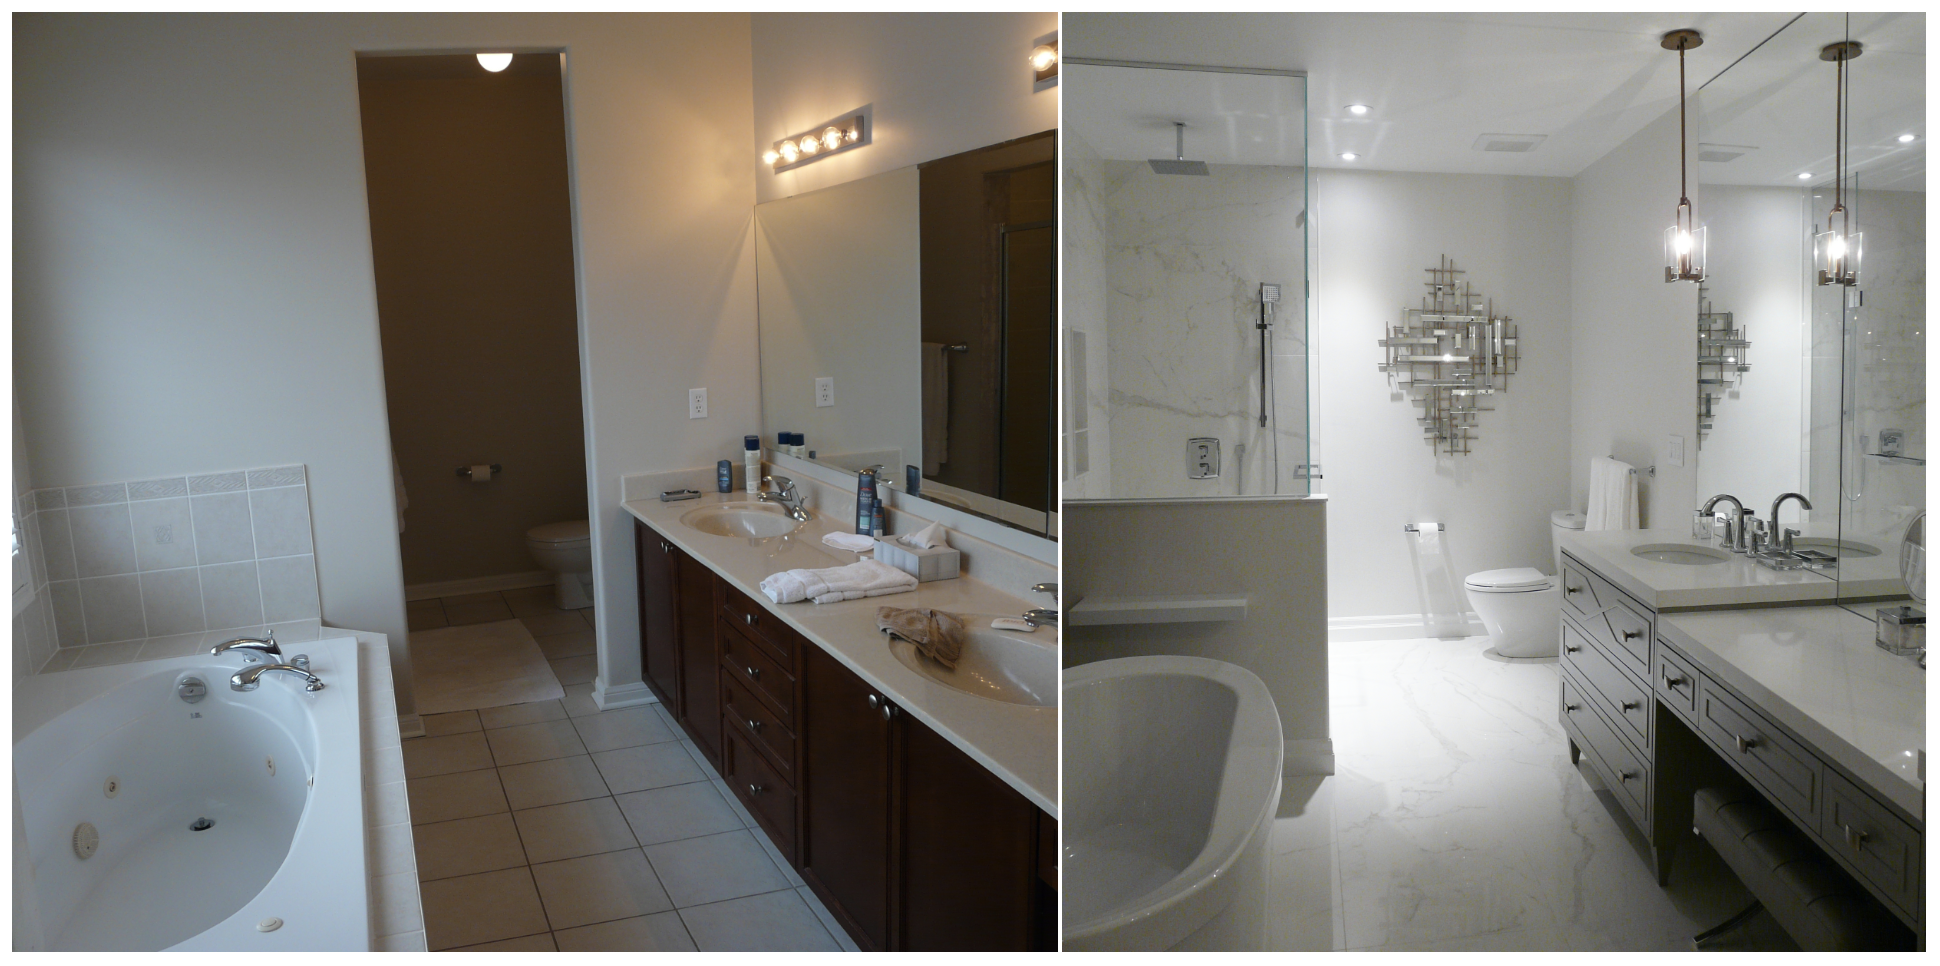 Bathroom Renovation Cost What To, How Much Does It Cost To Renovate A Bathroom In Ontario